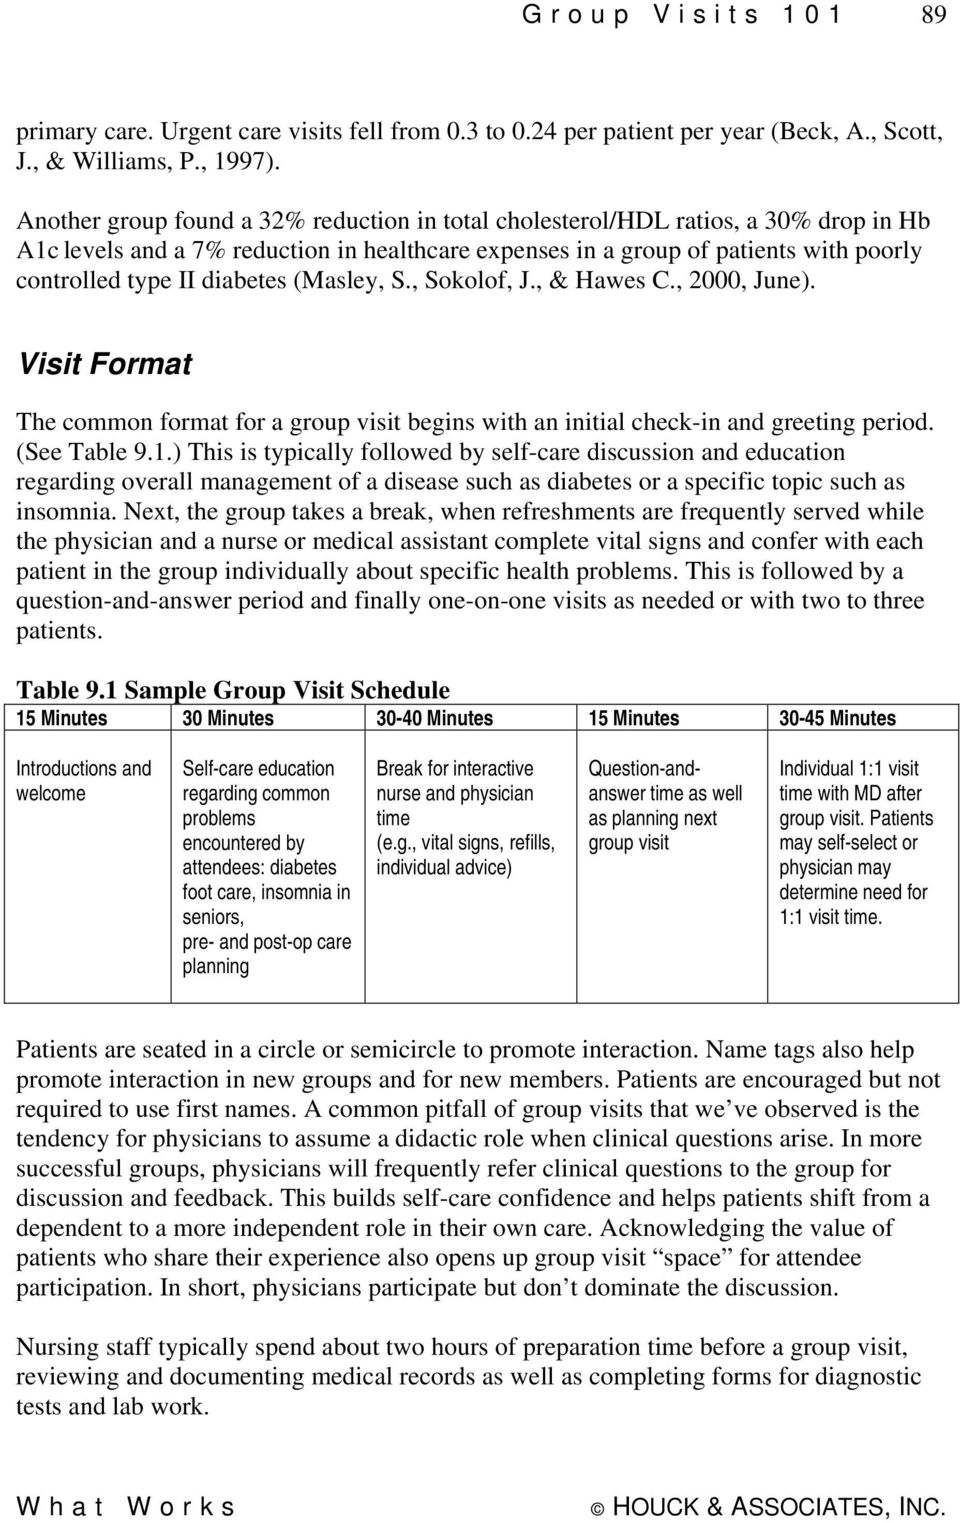 diabetes (Masley, S., Sokolof, J., & Hawes C., 2000, June). Visit Format The common format for a group visit begins with an initial check-in and greeting period. (See Table 9.1.